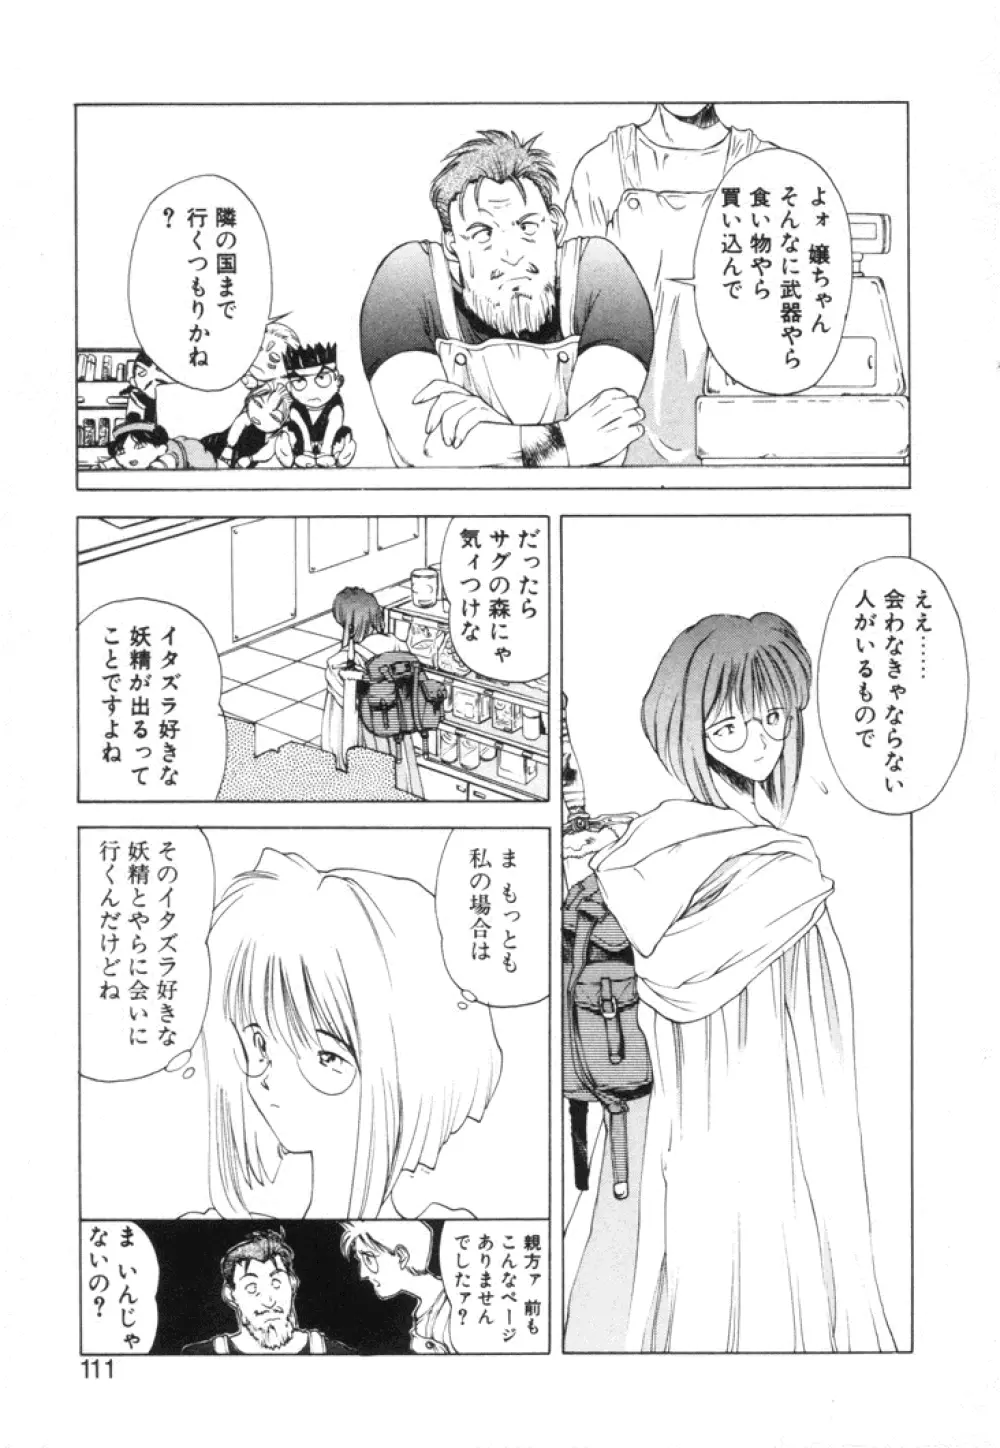 History 2 – Story Of The Forest Fairy 2 114ページ